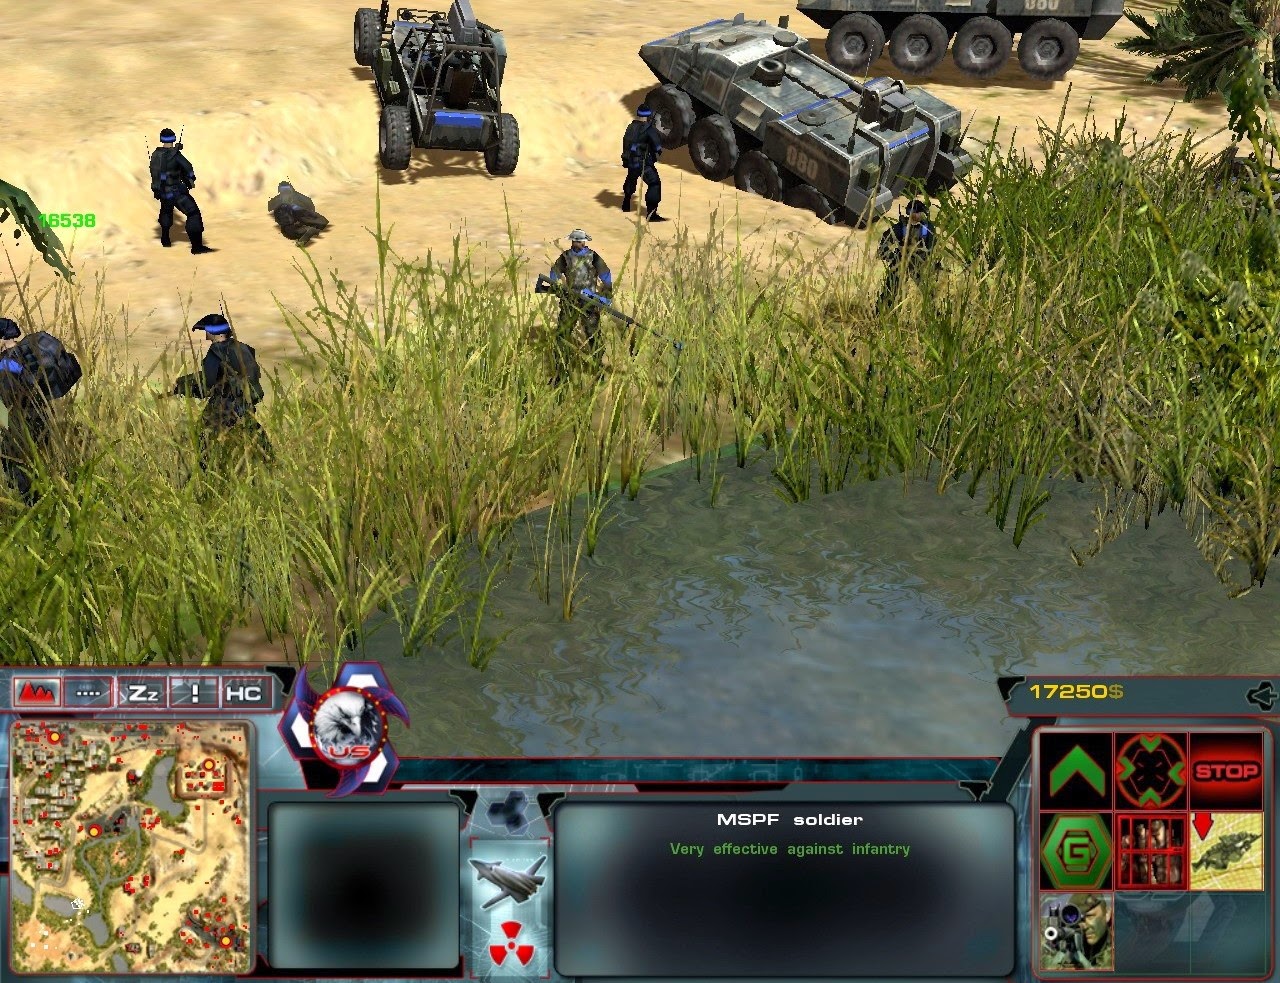 act of war direct action download full game